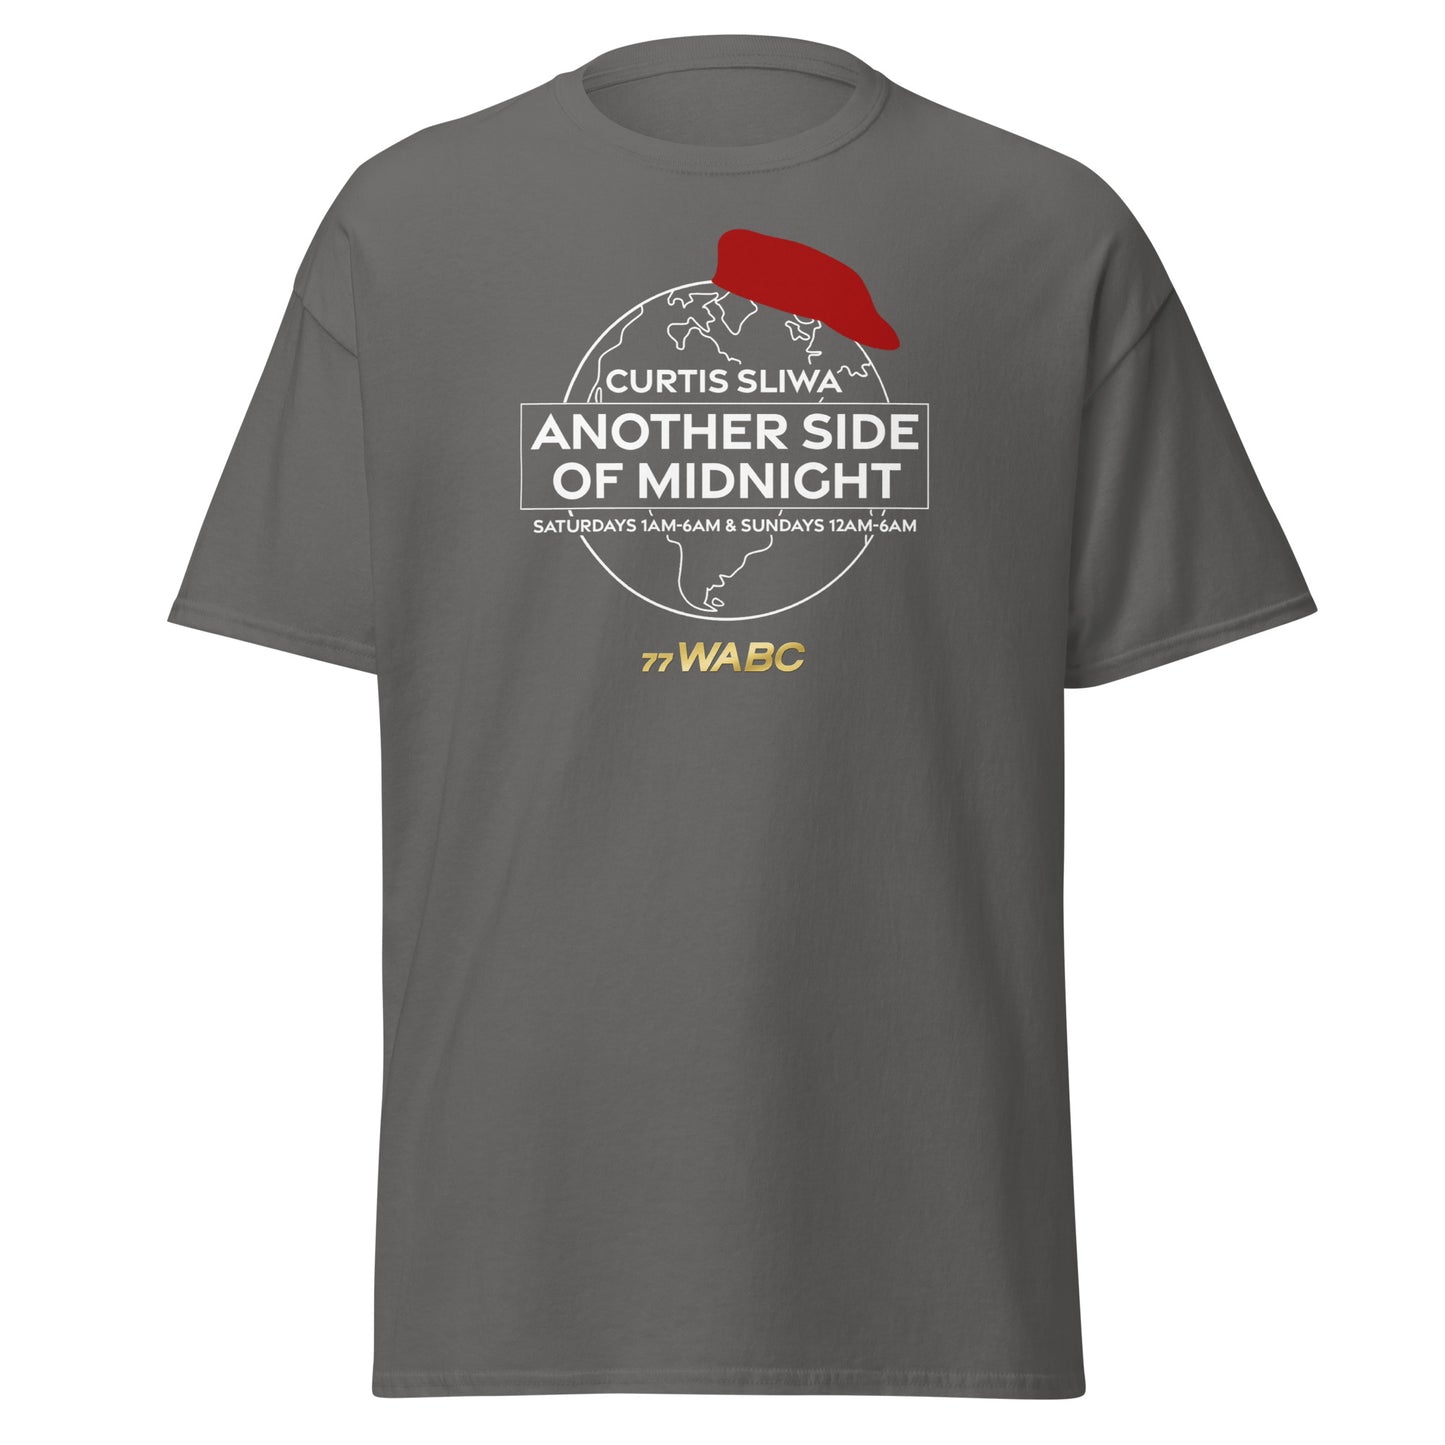 Another Side of Midnight classic tee